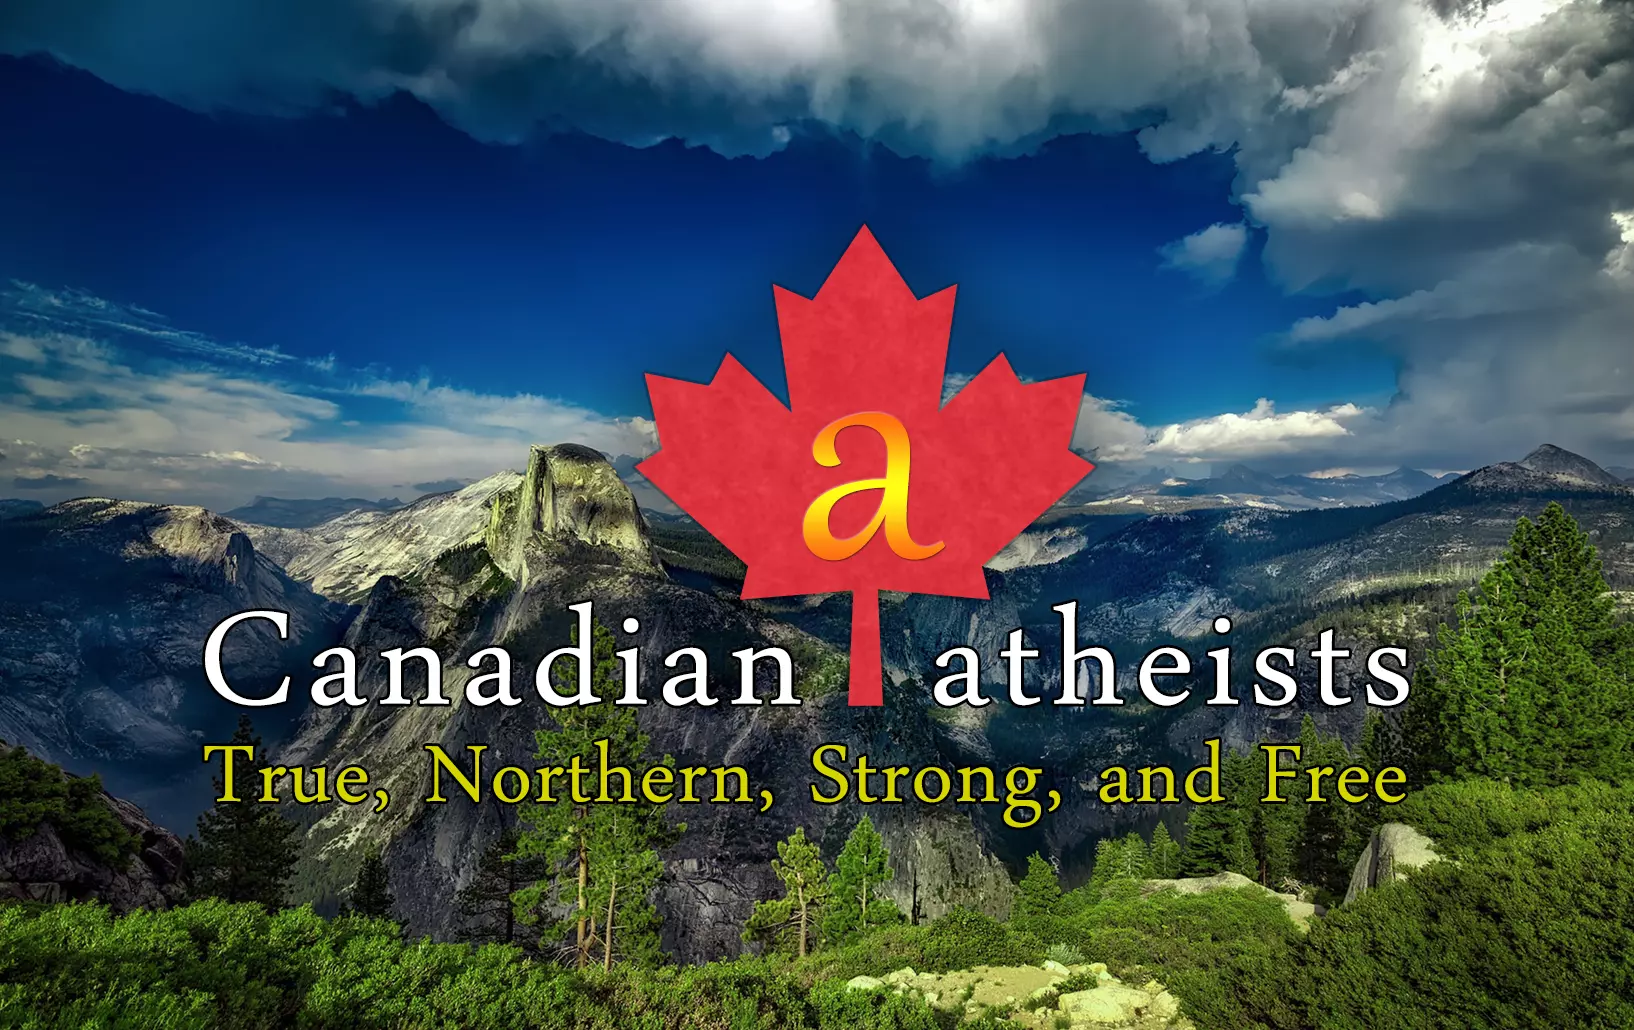 Canadian atheists</b> - True, Northern, Strong, and Free